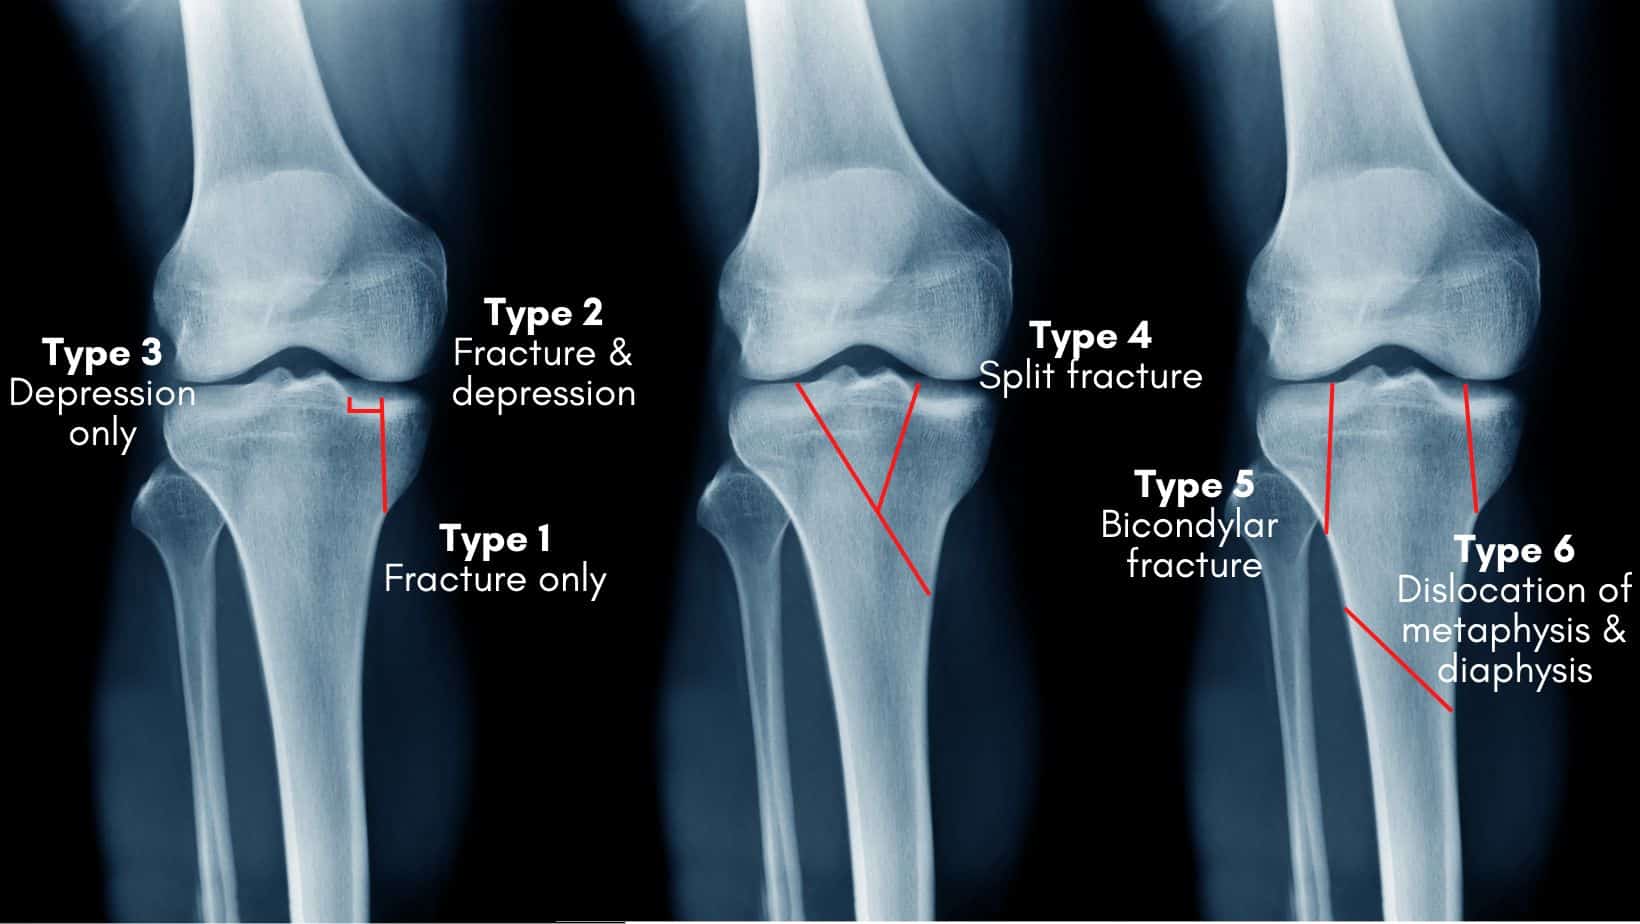 Knee Fracture Distal Femur Patella And Tibial Plateau Fractures | My ...